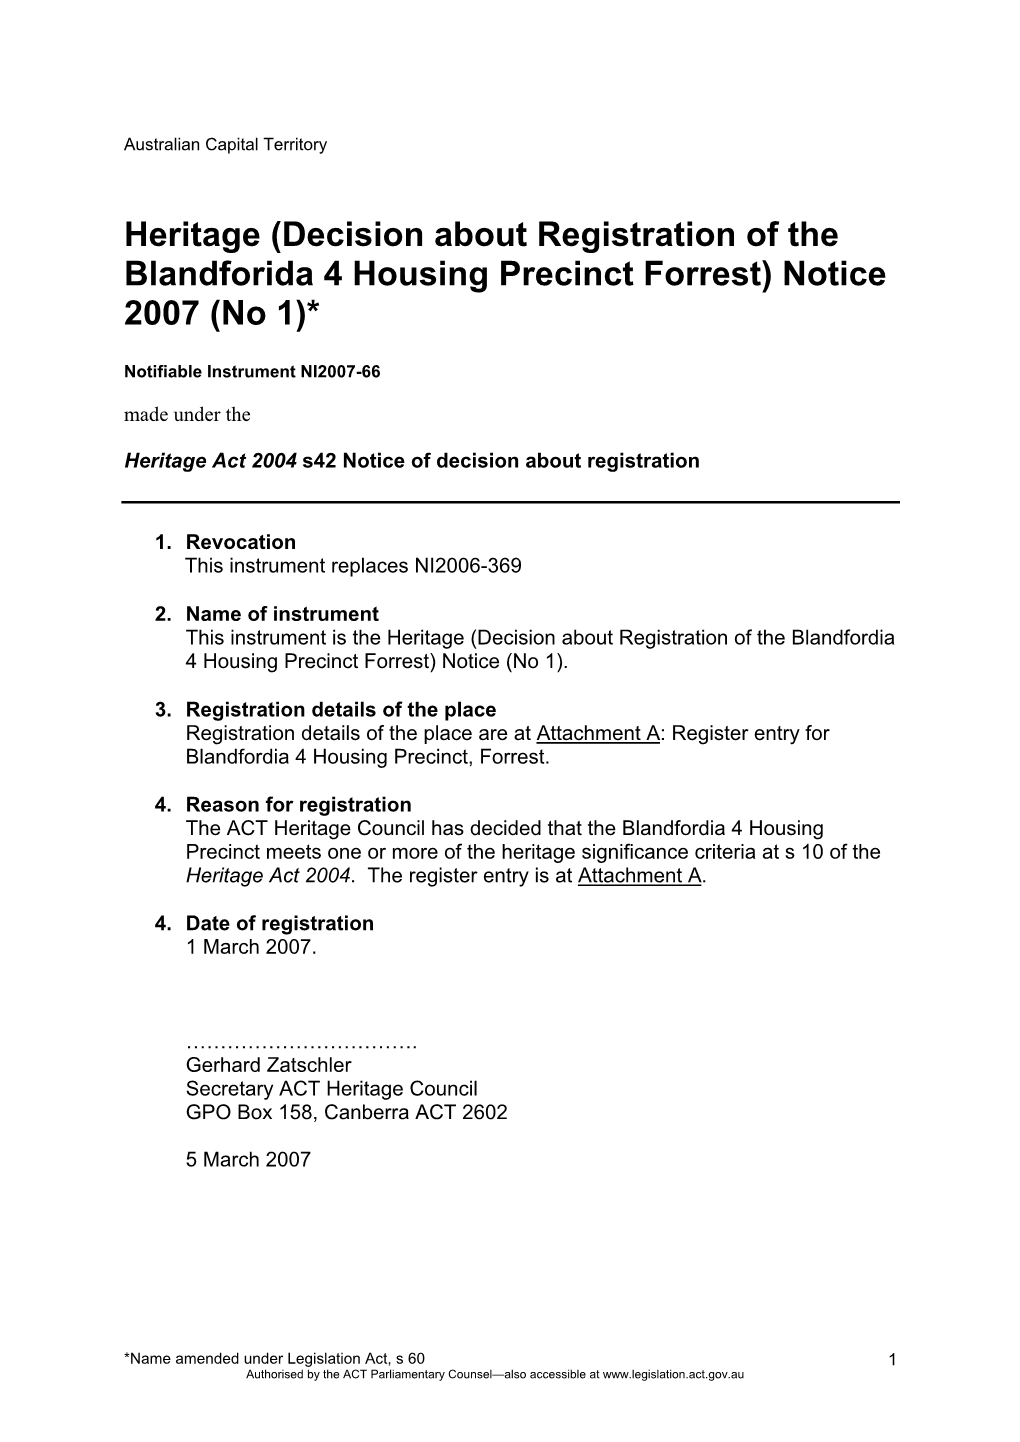 Heritage (Decision About Registration of the Blandforida 4 Housing Precinct Forrest) Notice 2007 (No 1)*